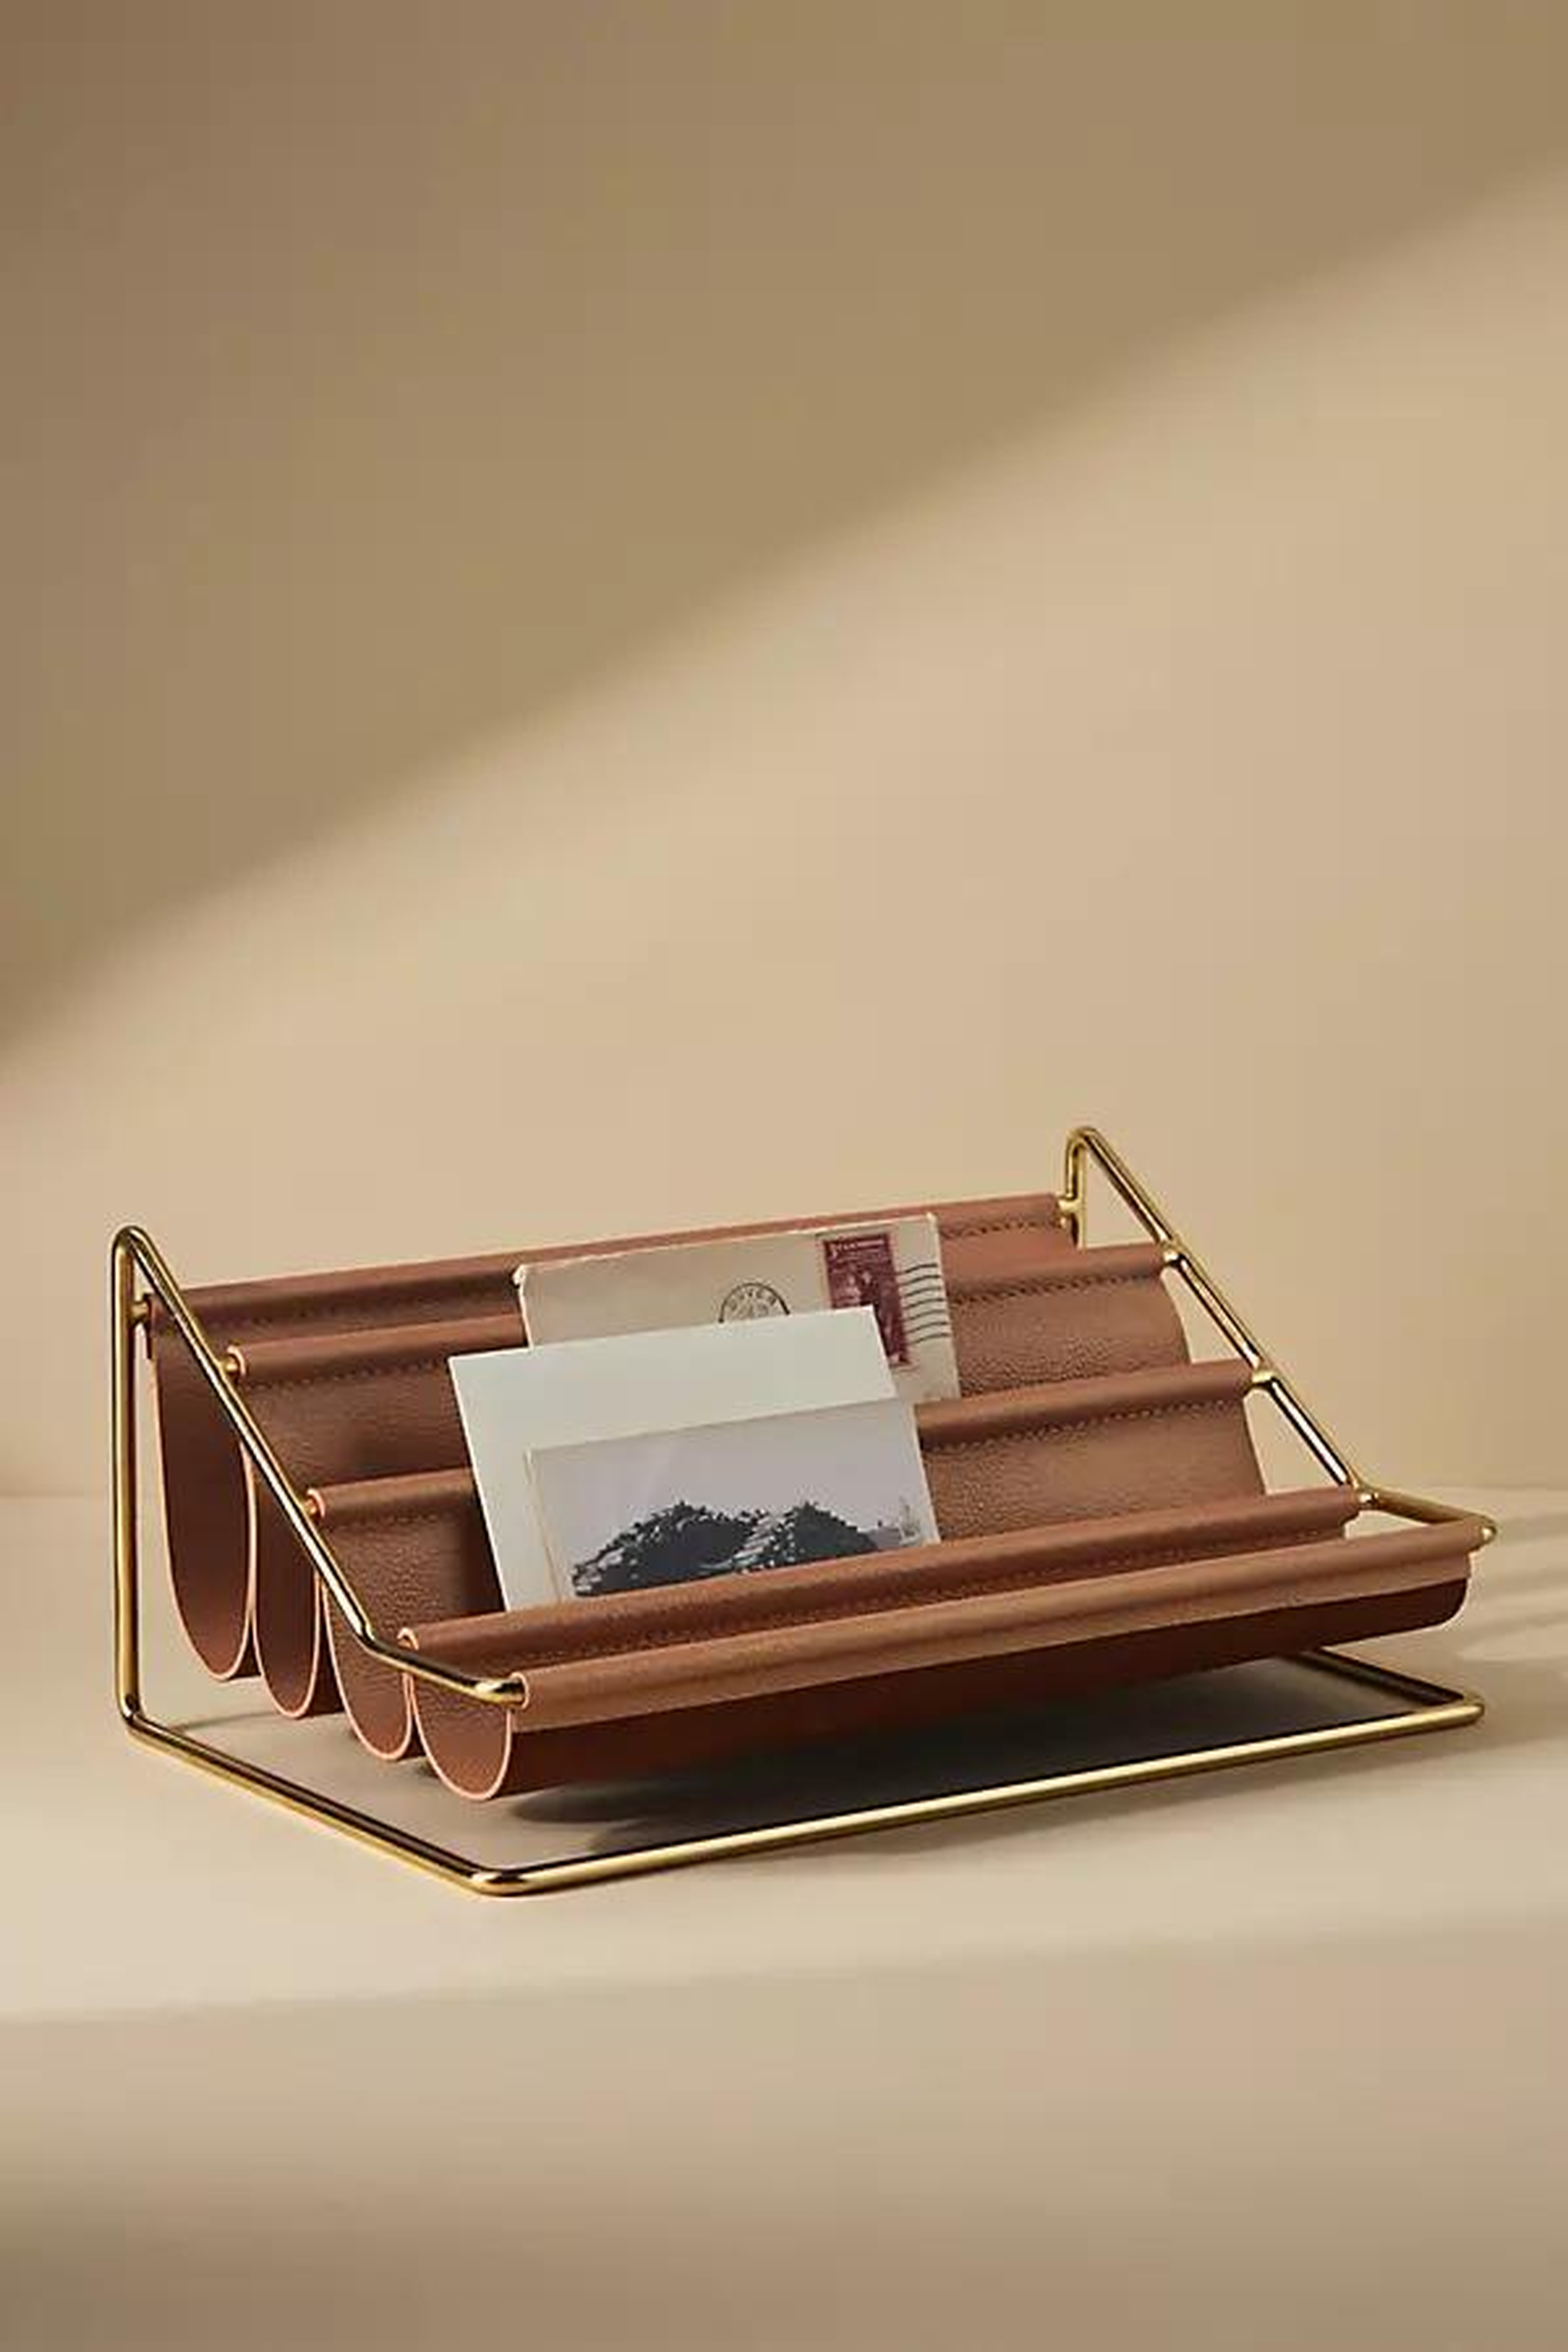 Leather Saddle Desk Organizer By Anthropologie in Pink - Anthropologie